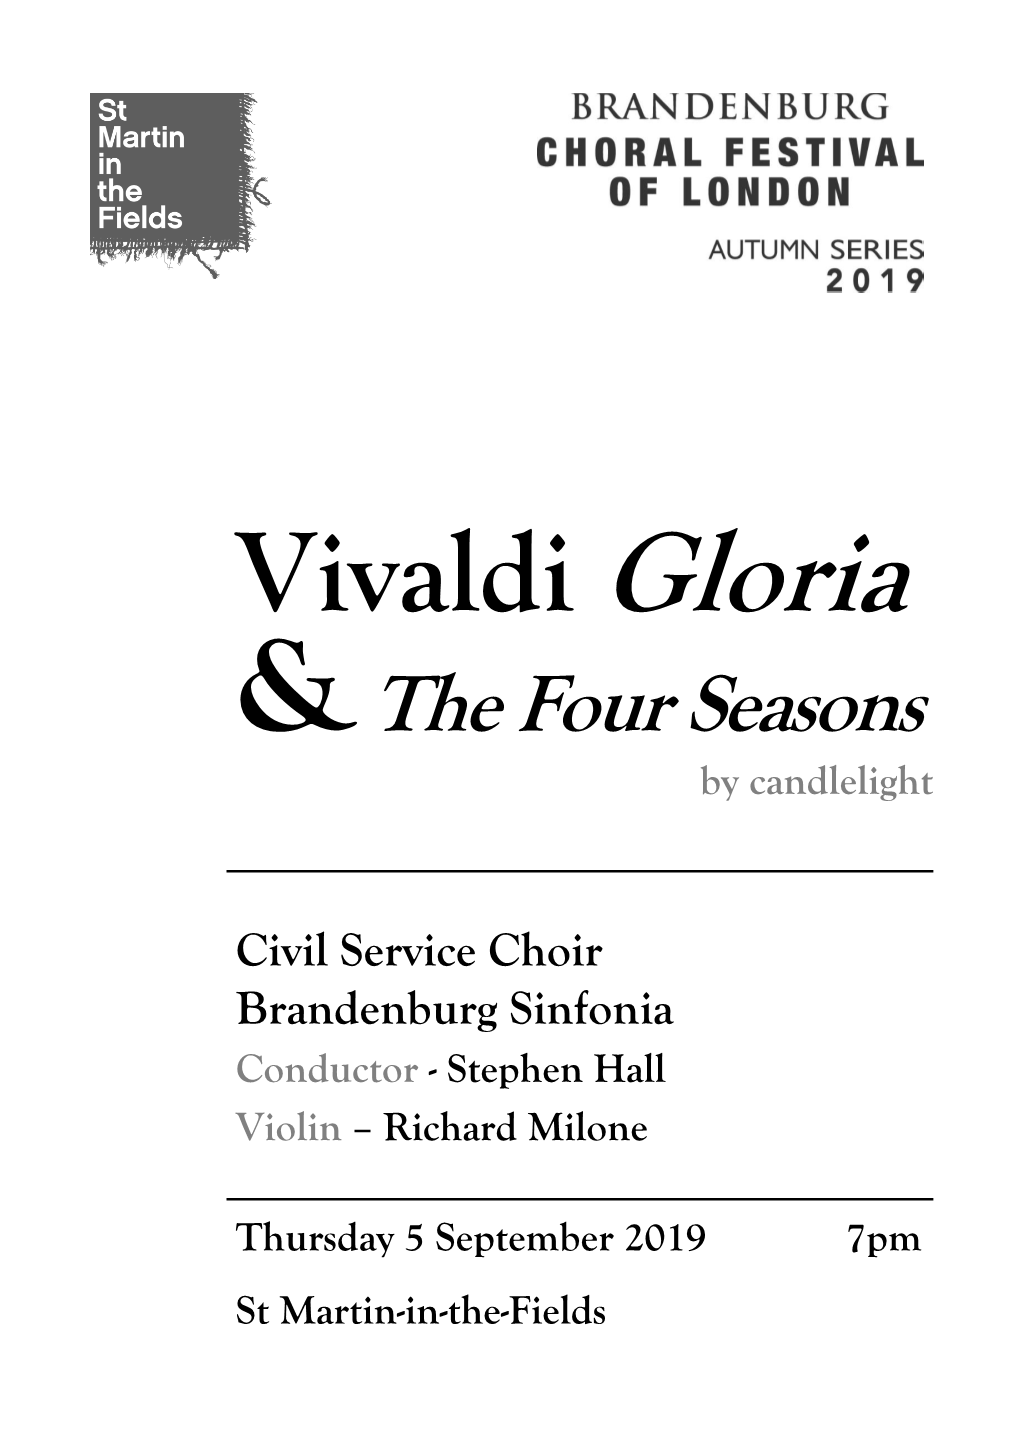 Concert 38: Vivaldi Gloria and the Four Seasons by Candelight